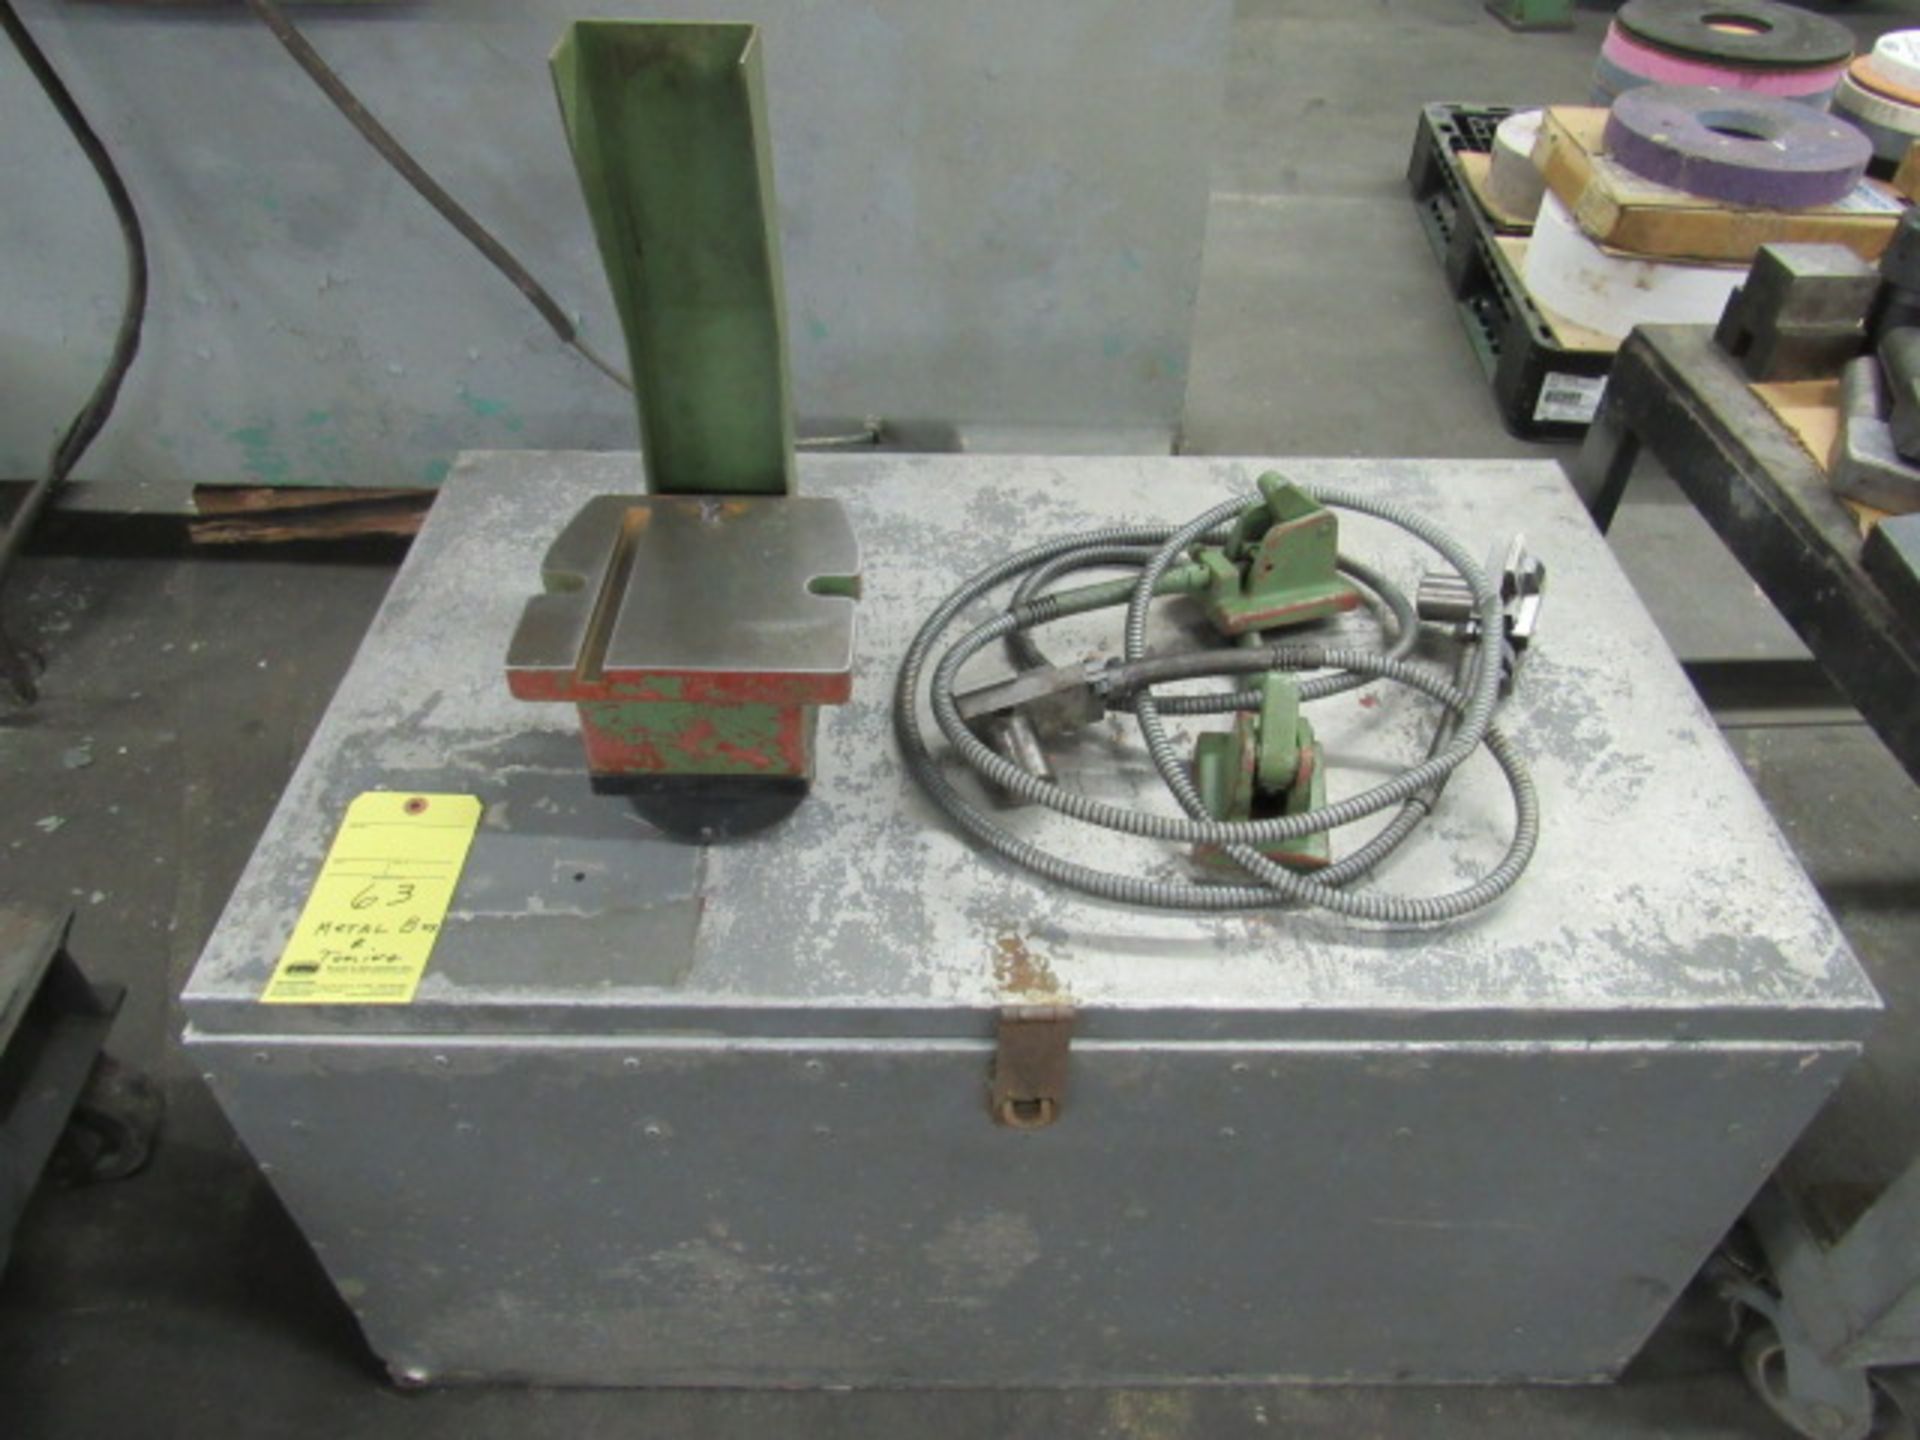 LOT OF TOOLING, for the Trumpf Nibbler (Lot 62): CONSISTS OF DYE BASE (1), DYE BASE (2),